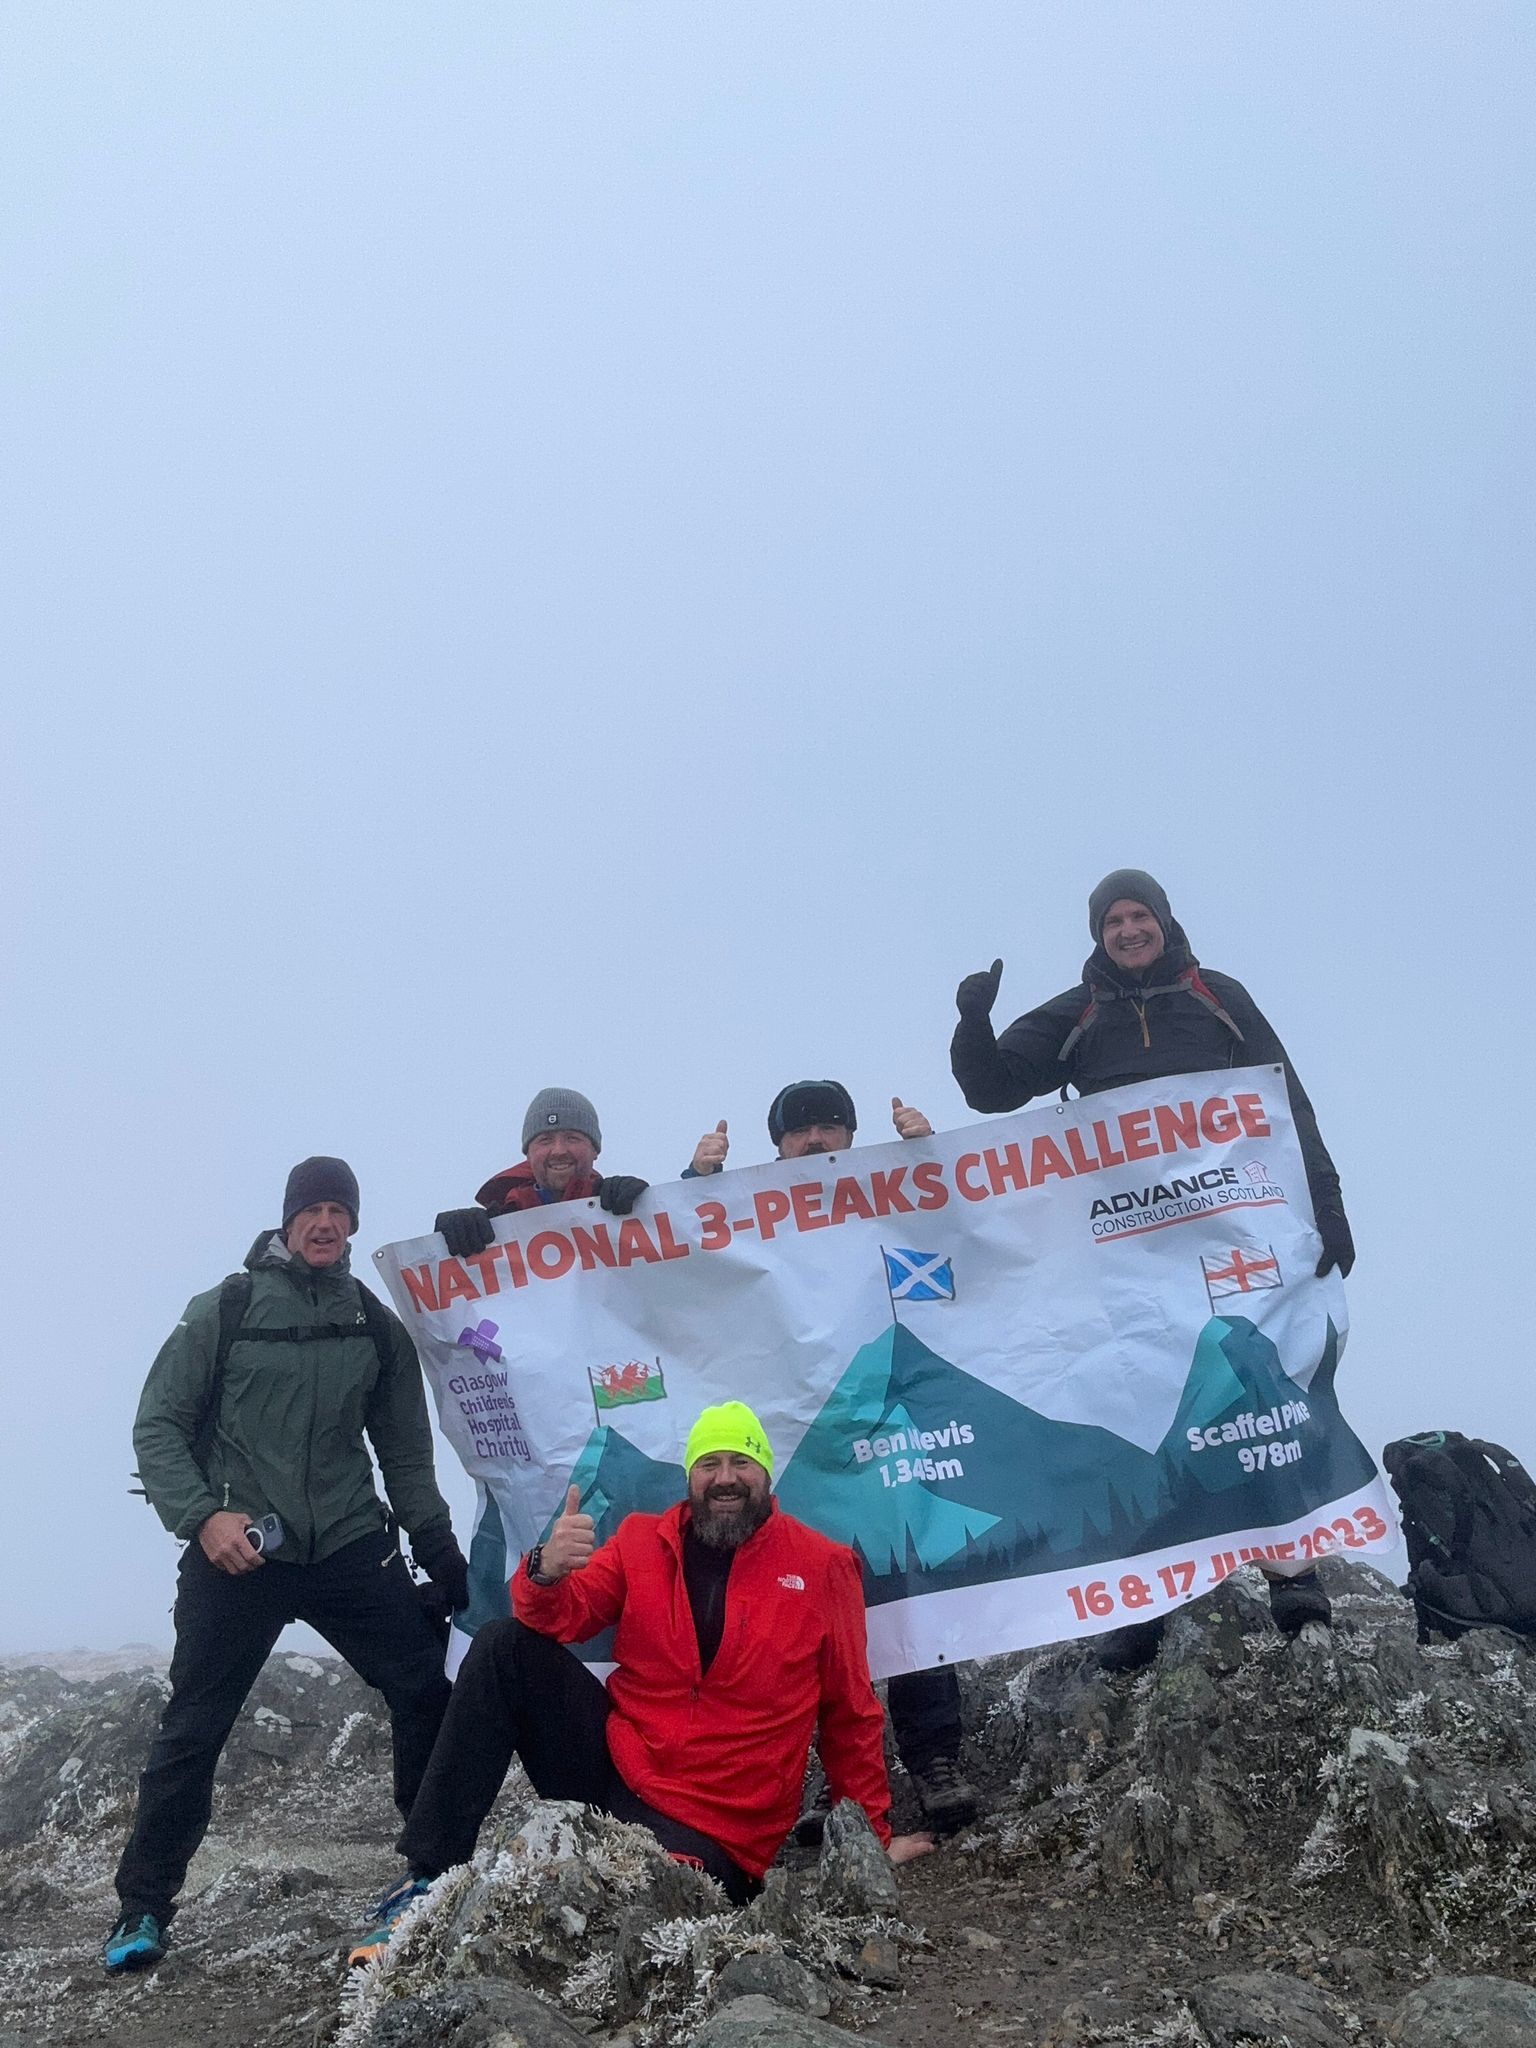 Colleagues to 'advance' on Three Peaks Challenge for charity